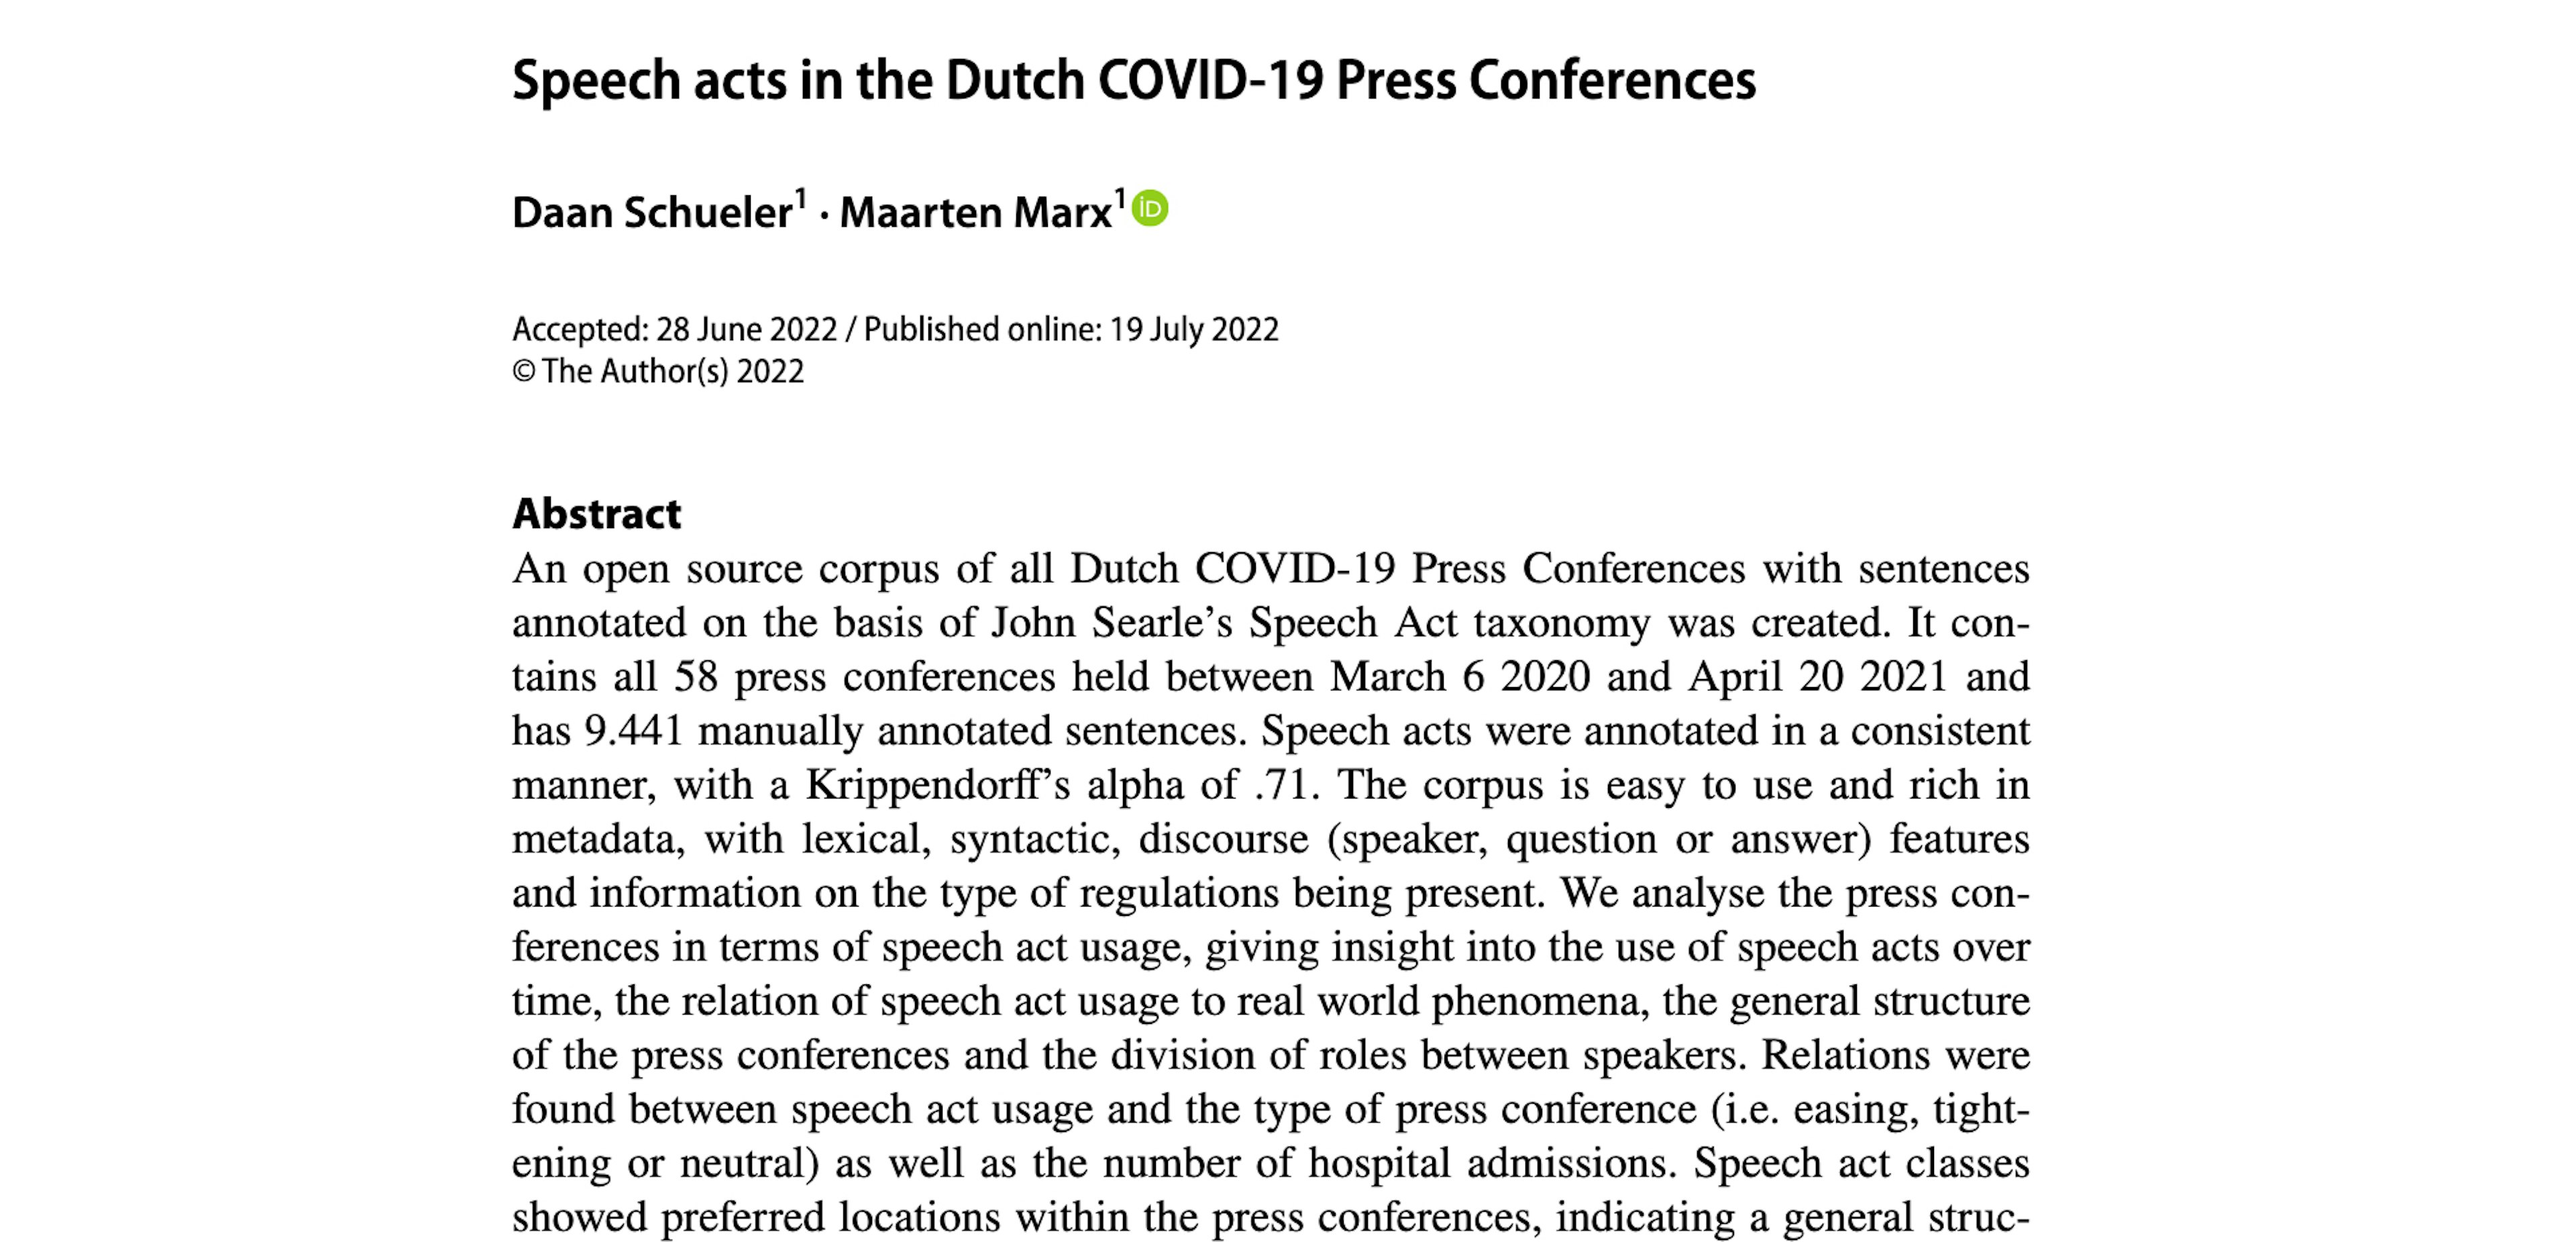 Speech acts in the Dutch COVID-19 Press Conferences